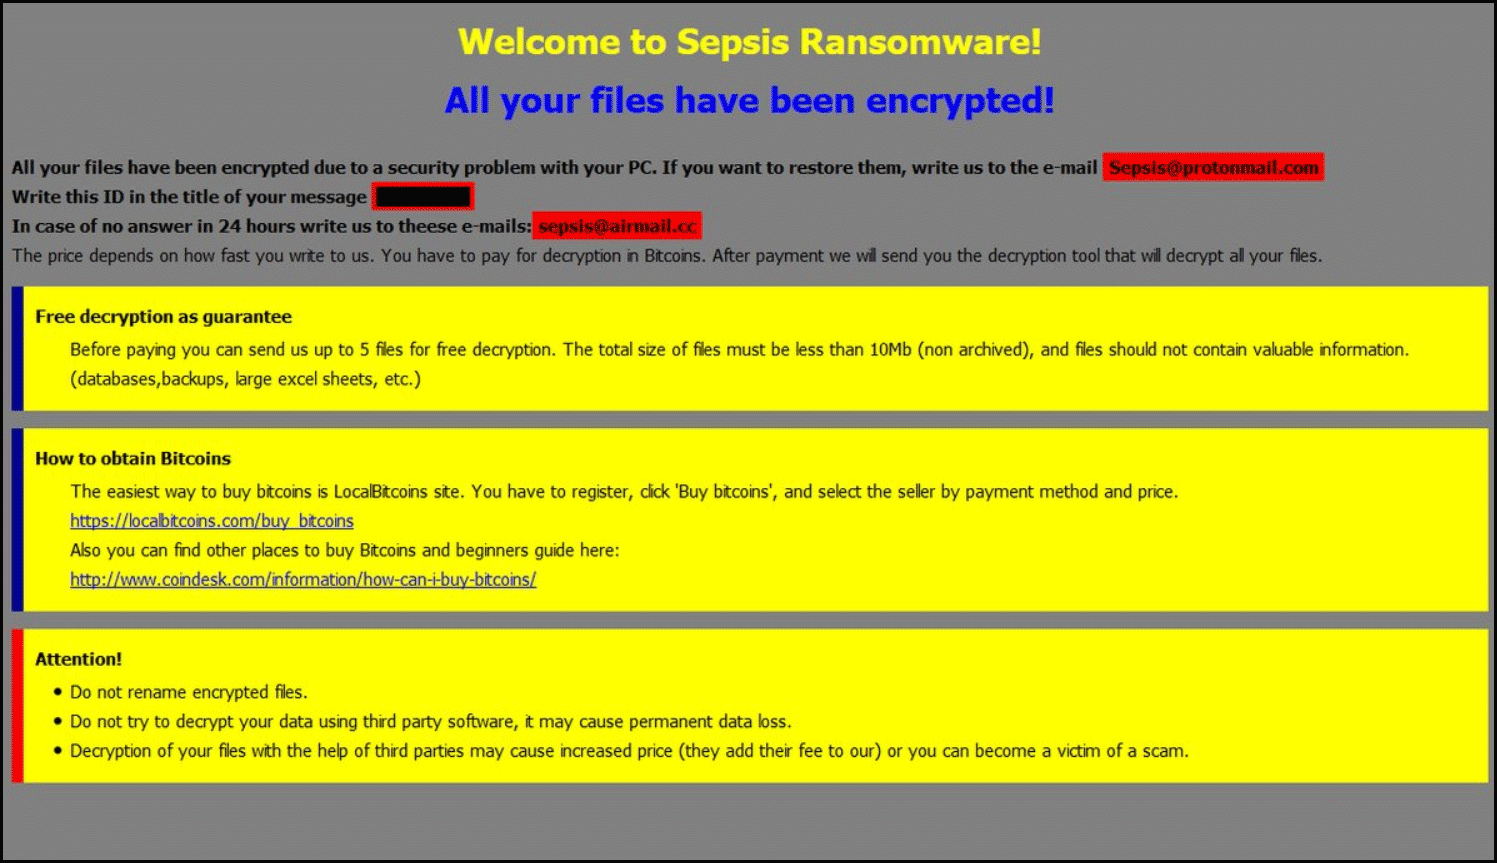 Ransom Note of Sepsis Ransomware